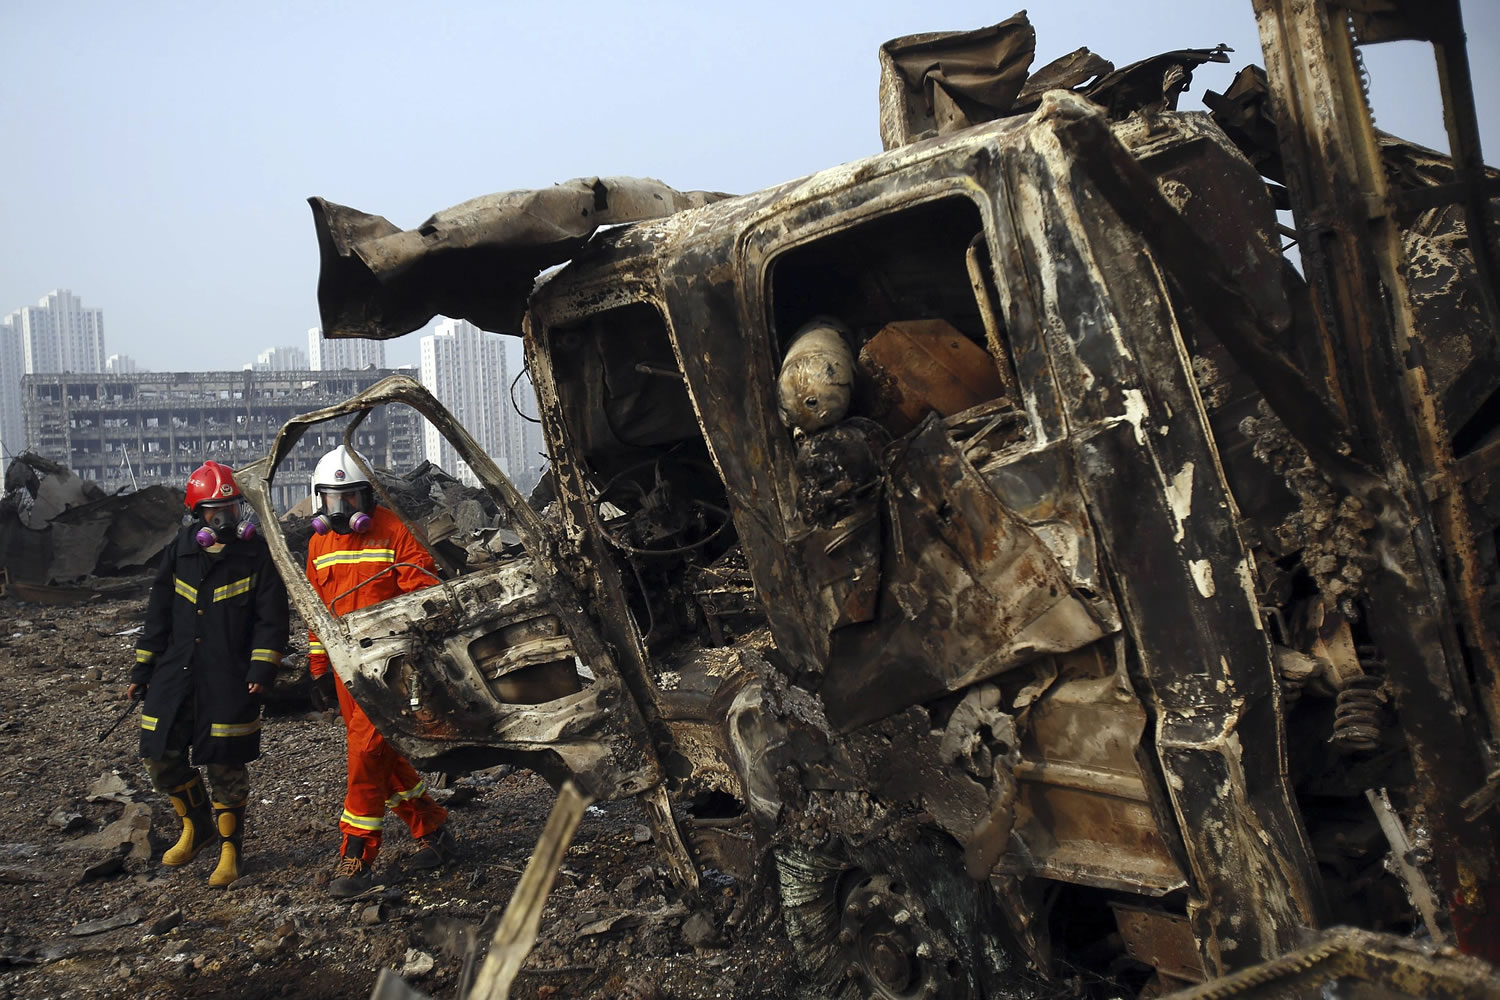 Firefighters walk past a destroyed fire truck at the site of an explosion in northeastern China's Tianjin municipality.